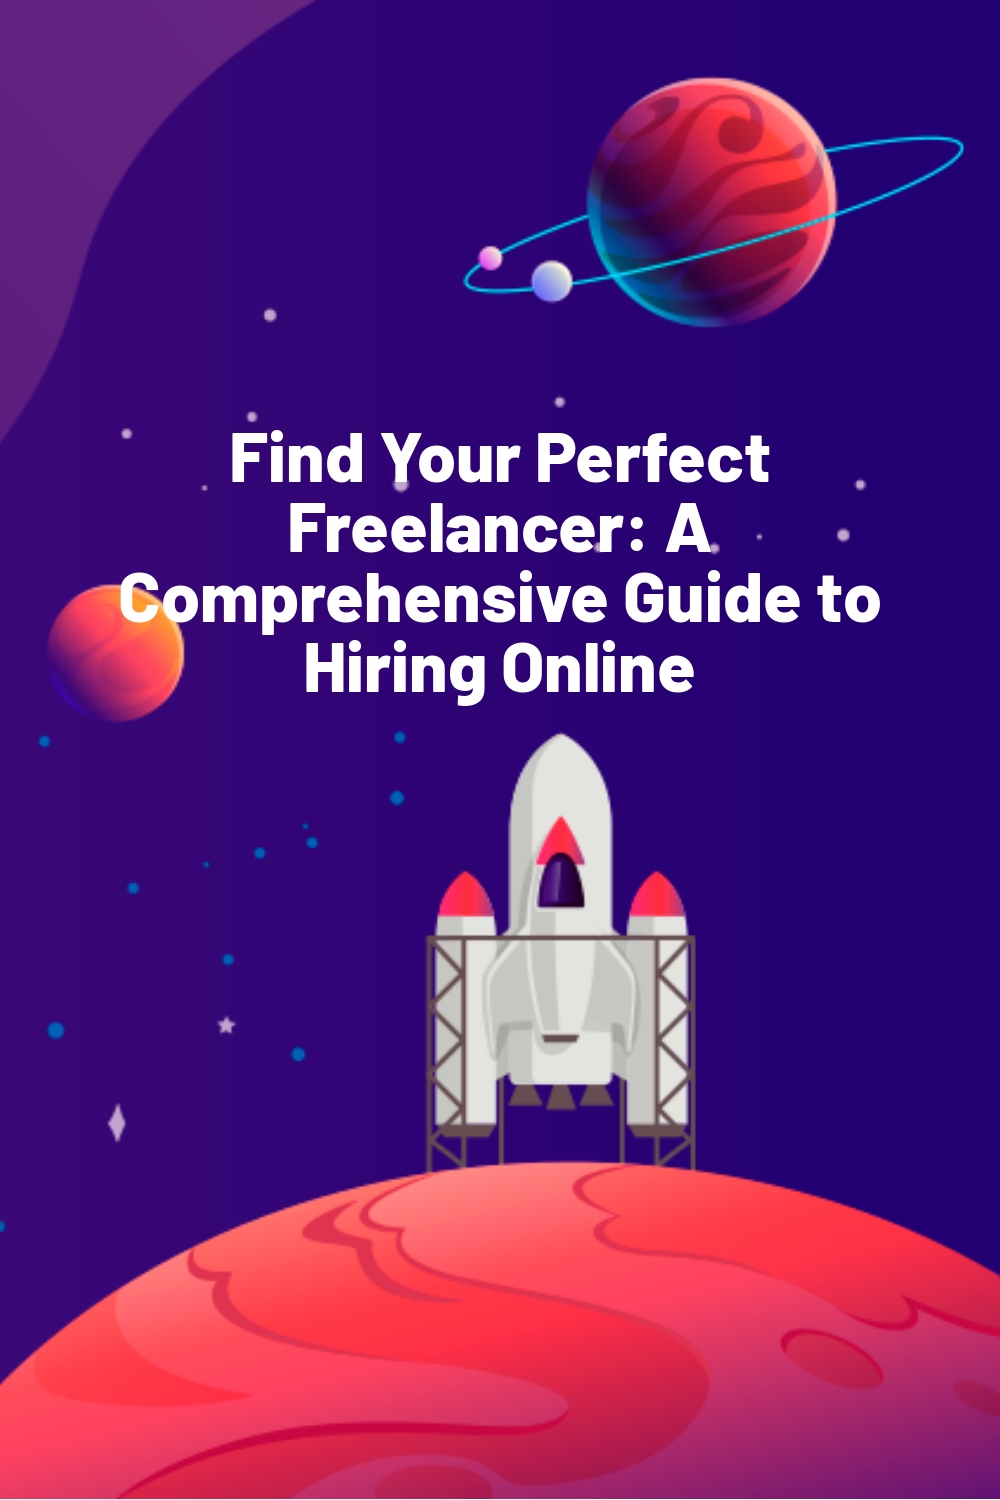 Find Your Perfect Freelancer: A Comprehensive Guide to Hiring Online